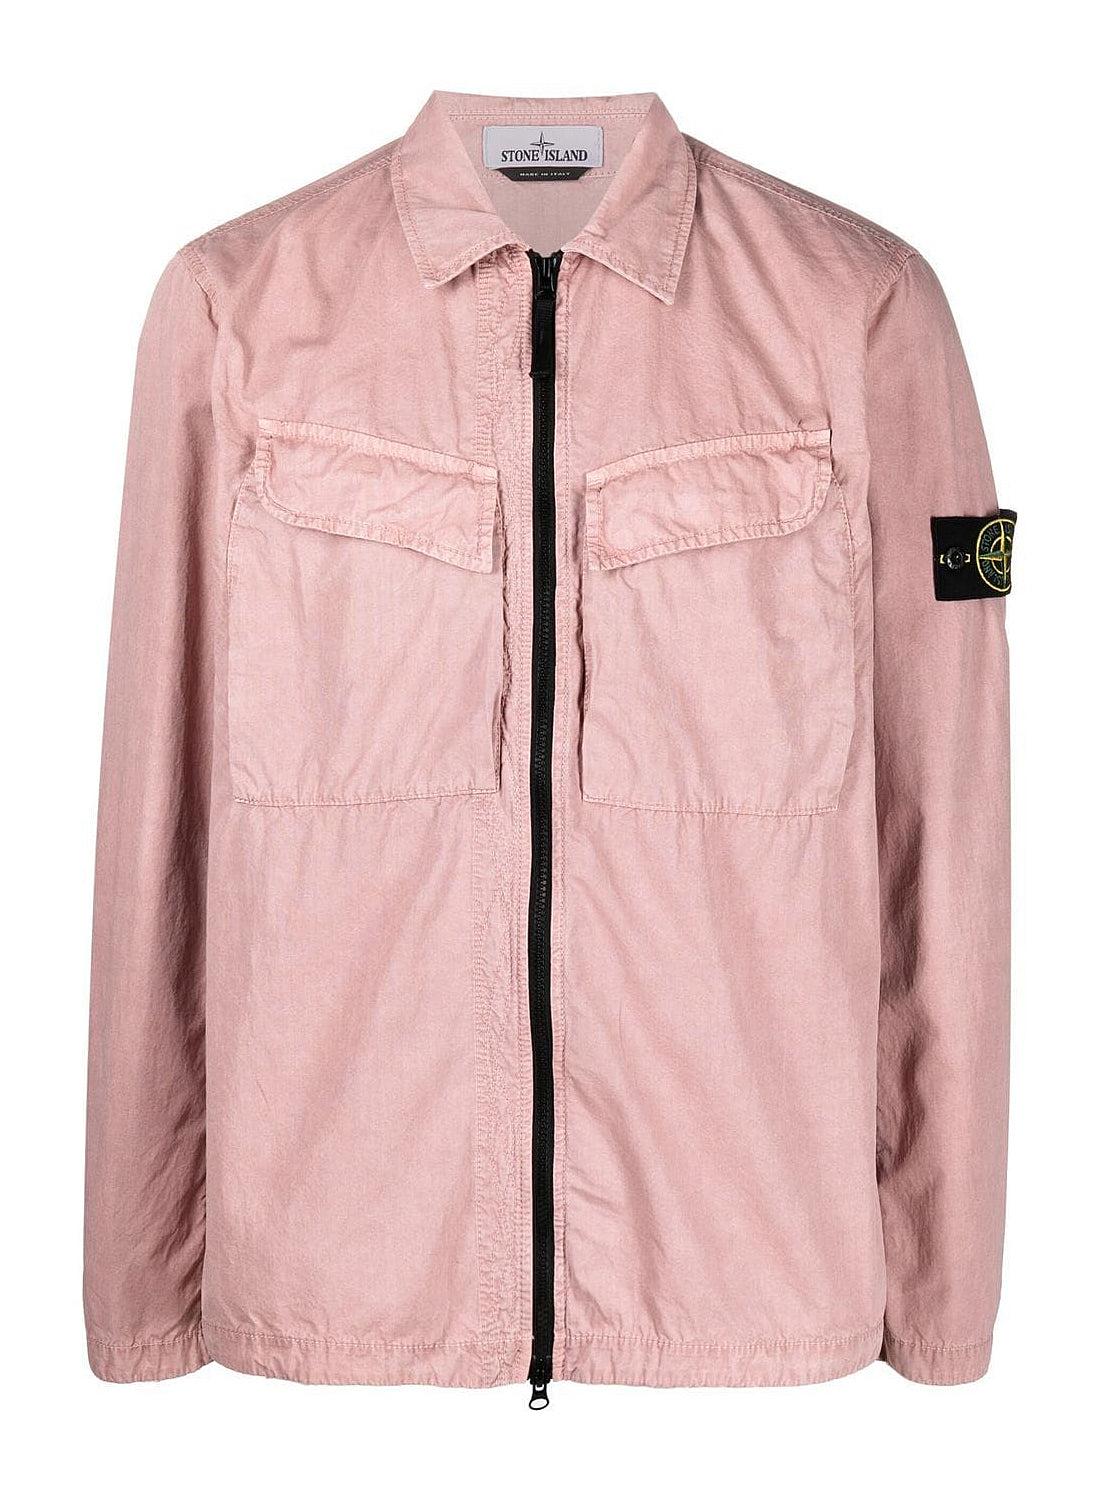 Stone Island Brushed Cotton Canvas, Garment Dyed 'old' Effect Overshirt in  Pink for Men | Lyst